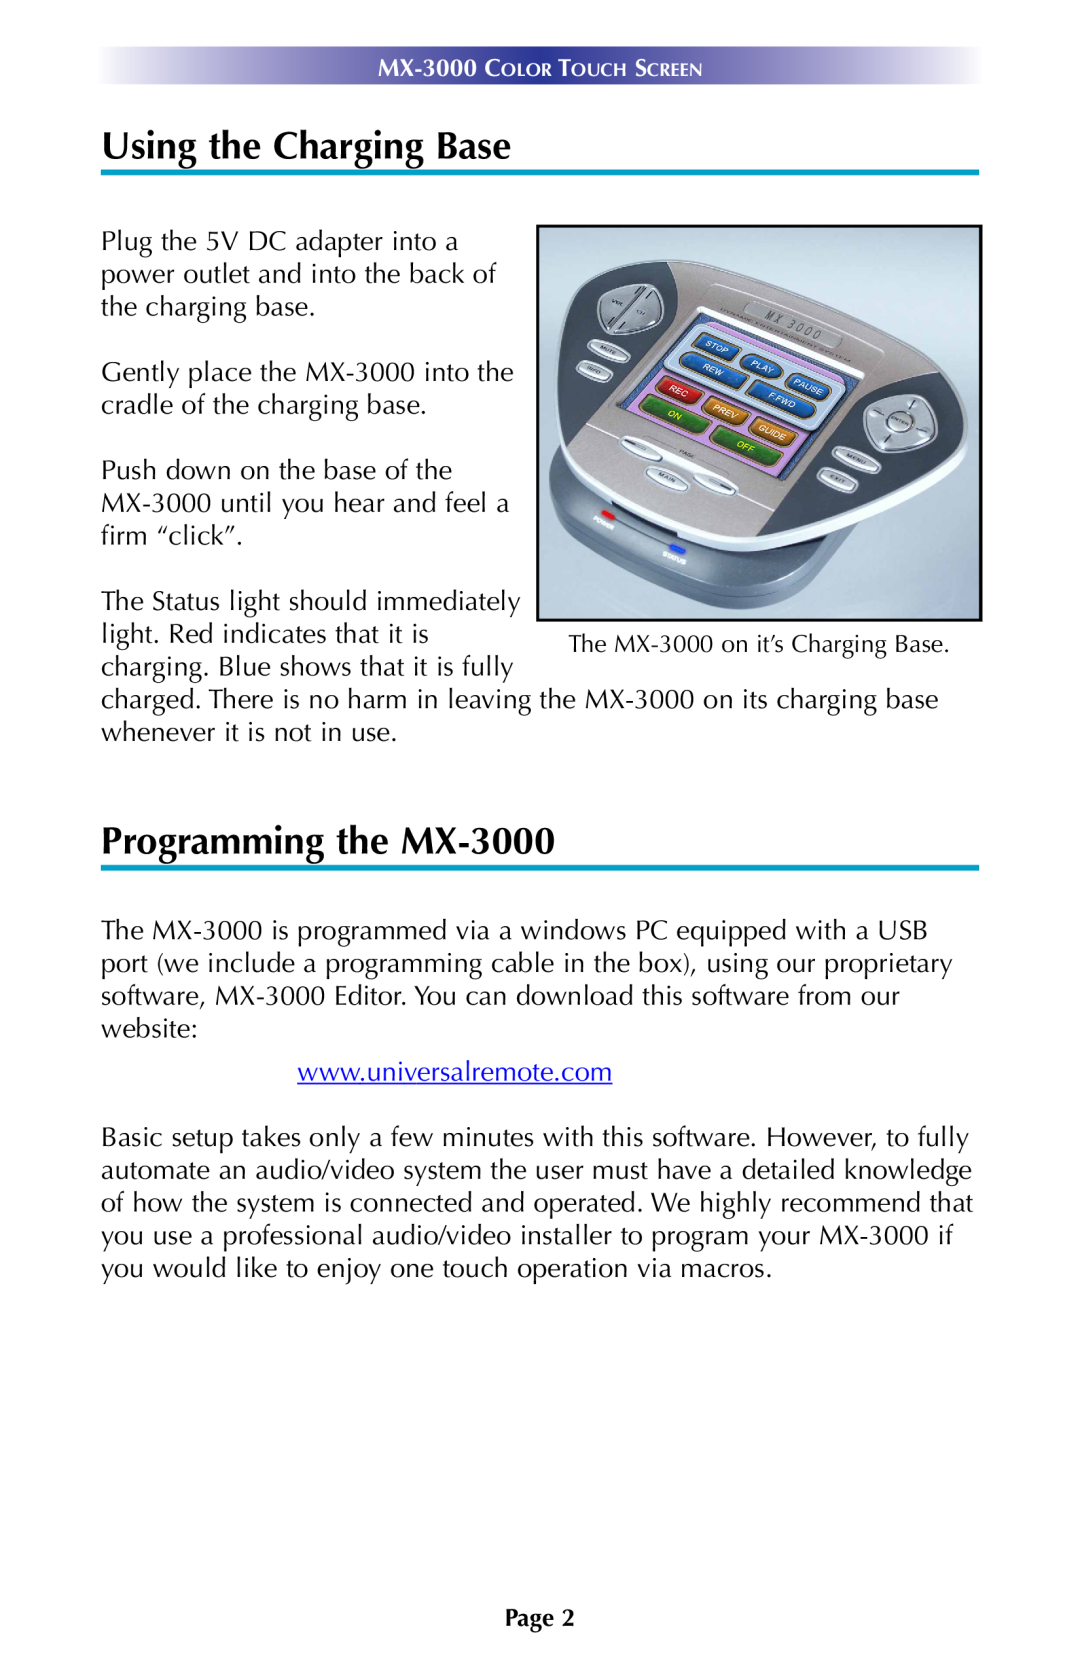 Universal Remote Control owner manual Using the Charging Base, Programming the MX-3000 